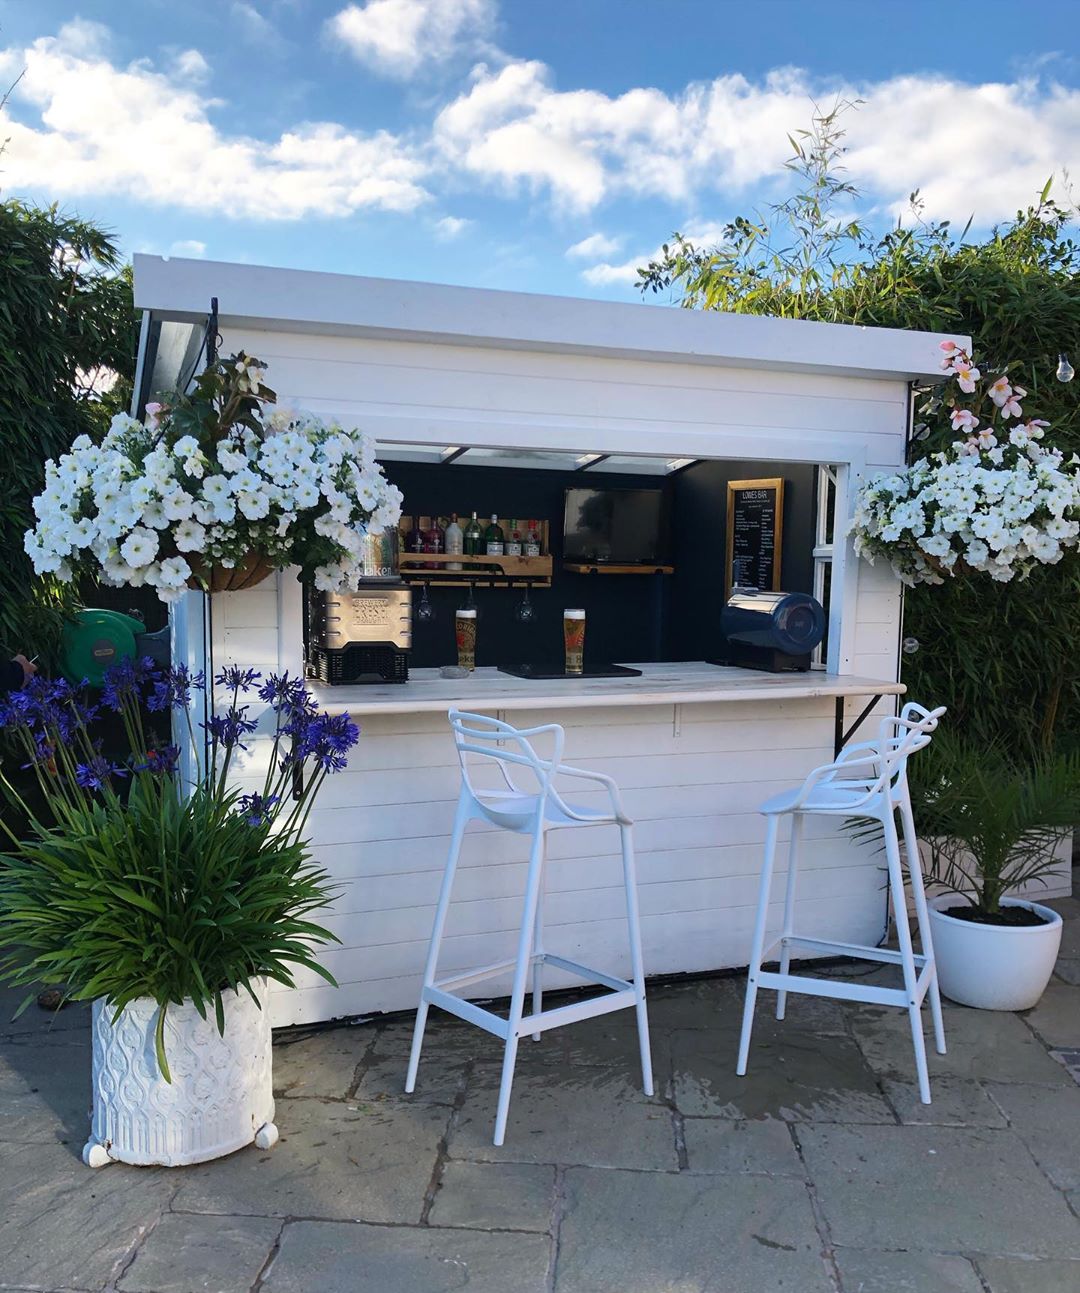 Small White Bar She Shed with White Stools in Front. Photo by Instagram user @houseonthedales